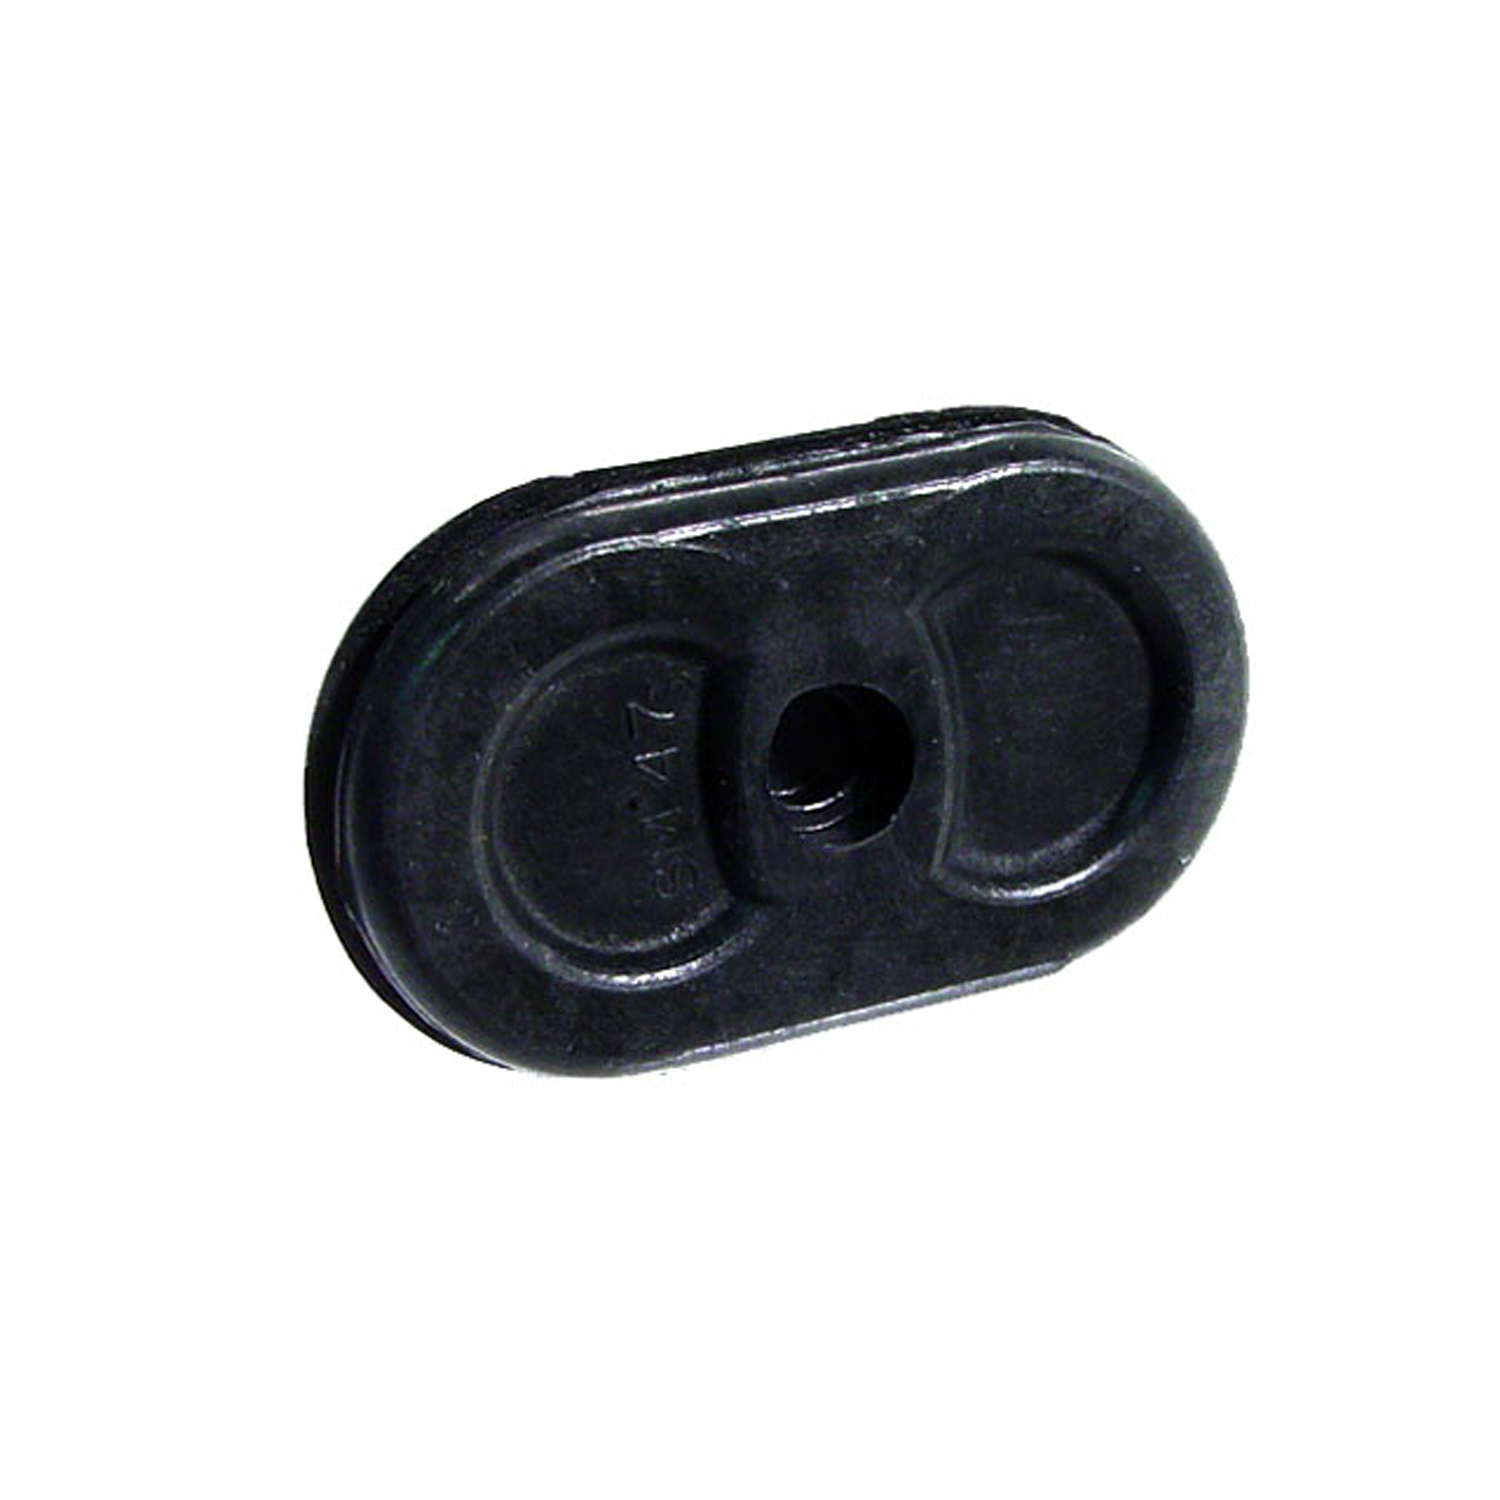 1947 Cadillac Series 62 Speedometer Cable Firewall Grommet.  Fits 1-7/8 long hole-SM 47